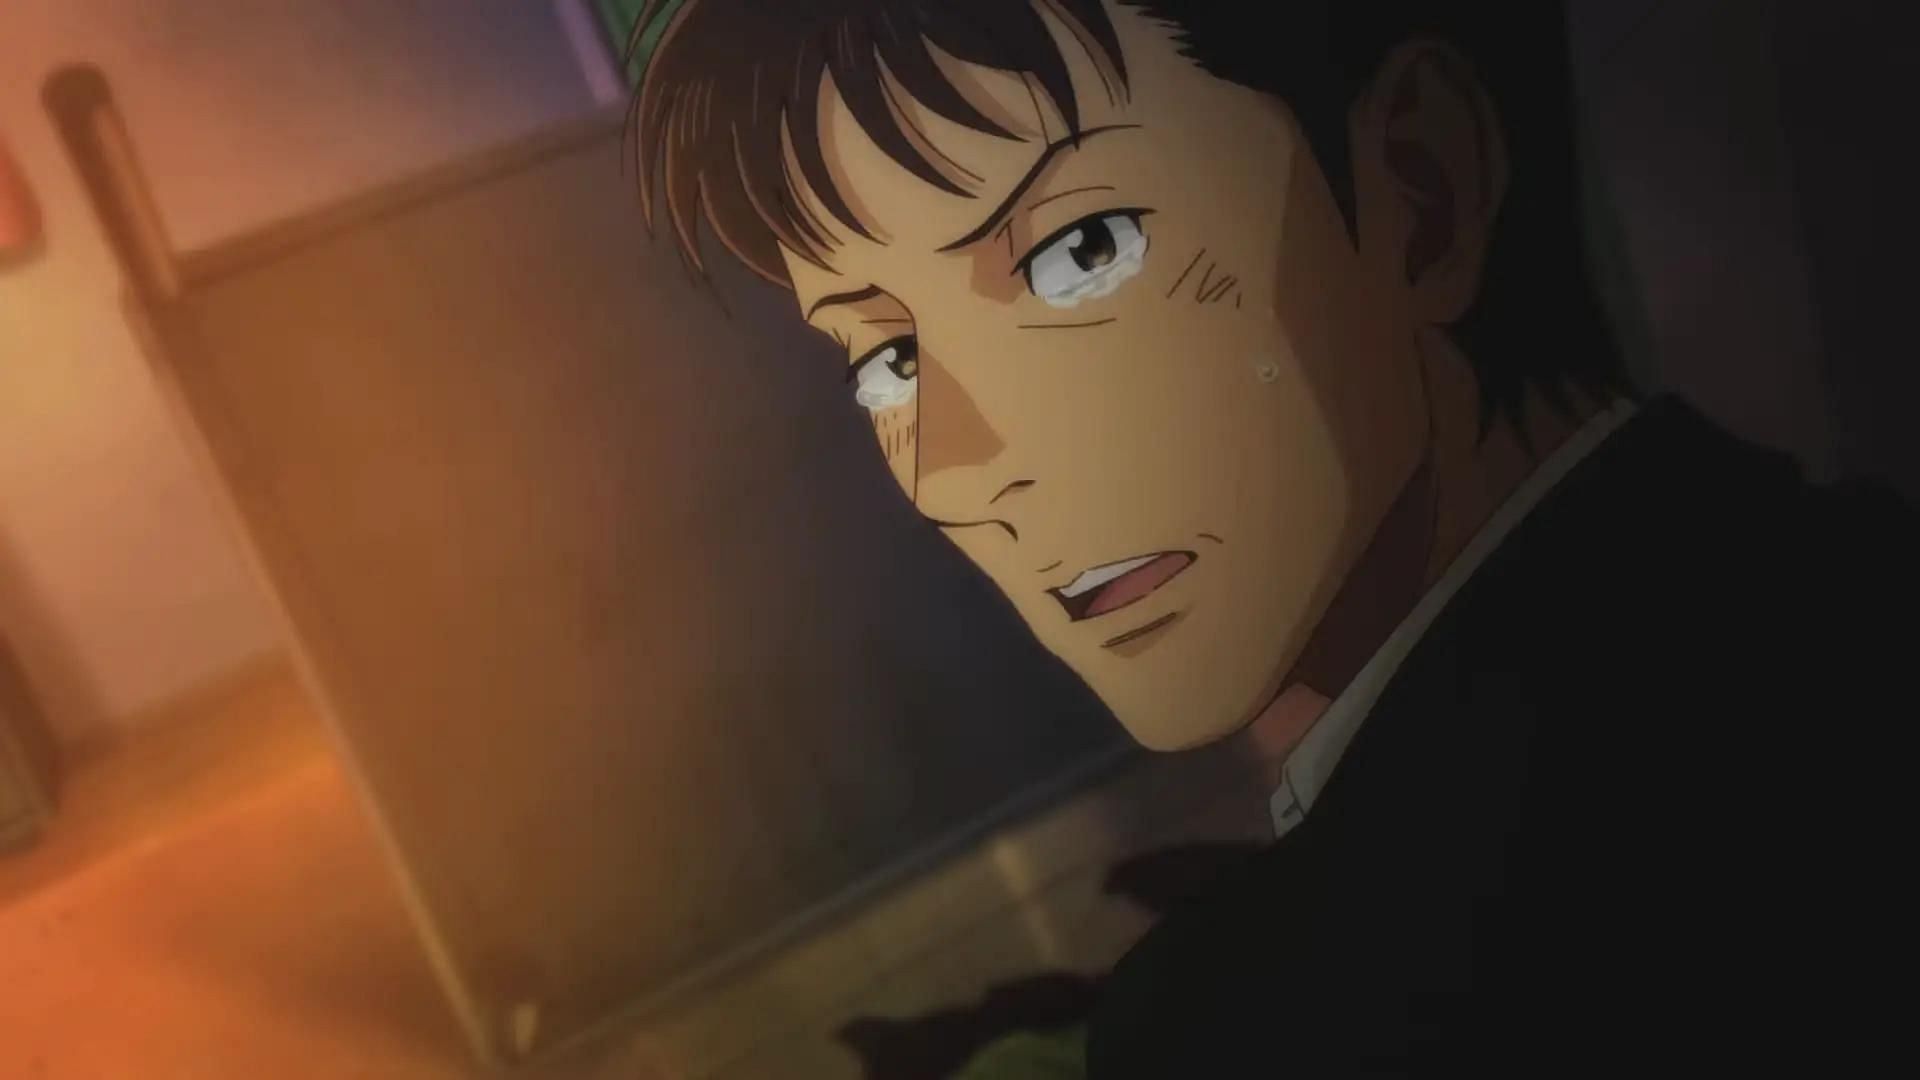 Tetsuo Tosu as seen in the My Home Hero anime 